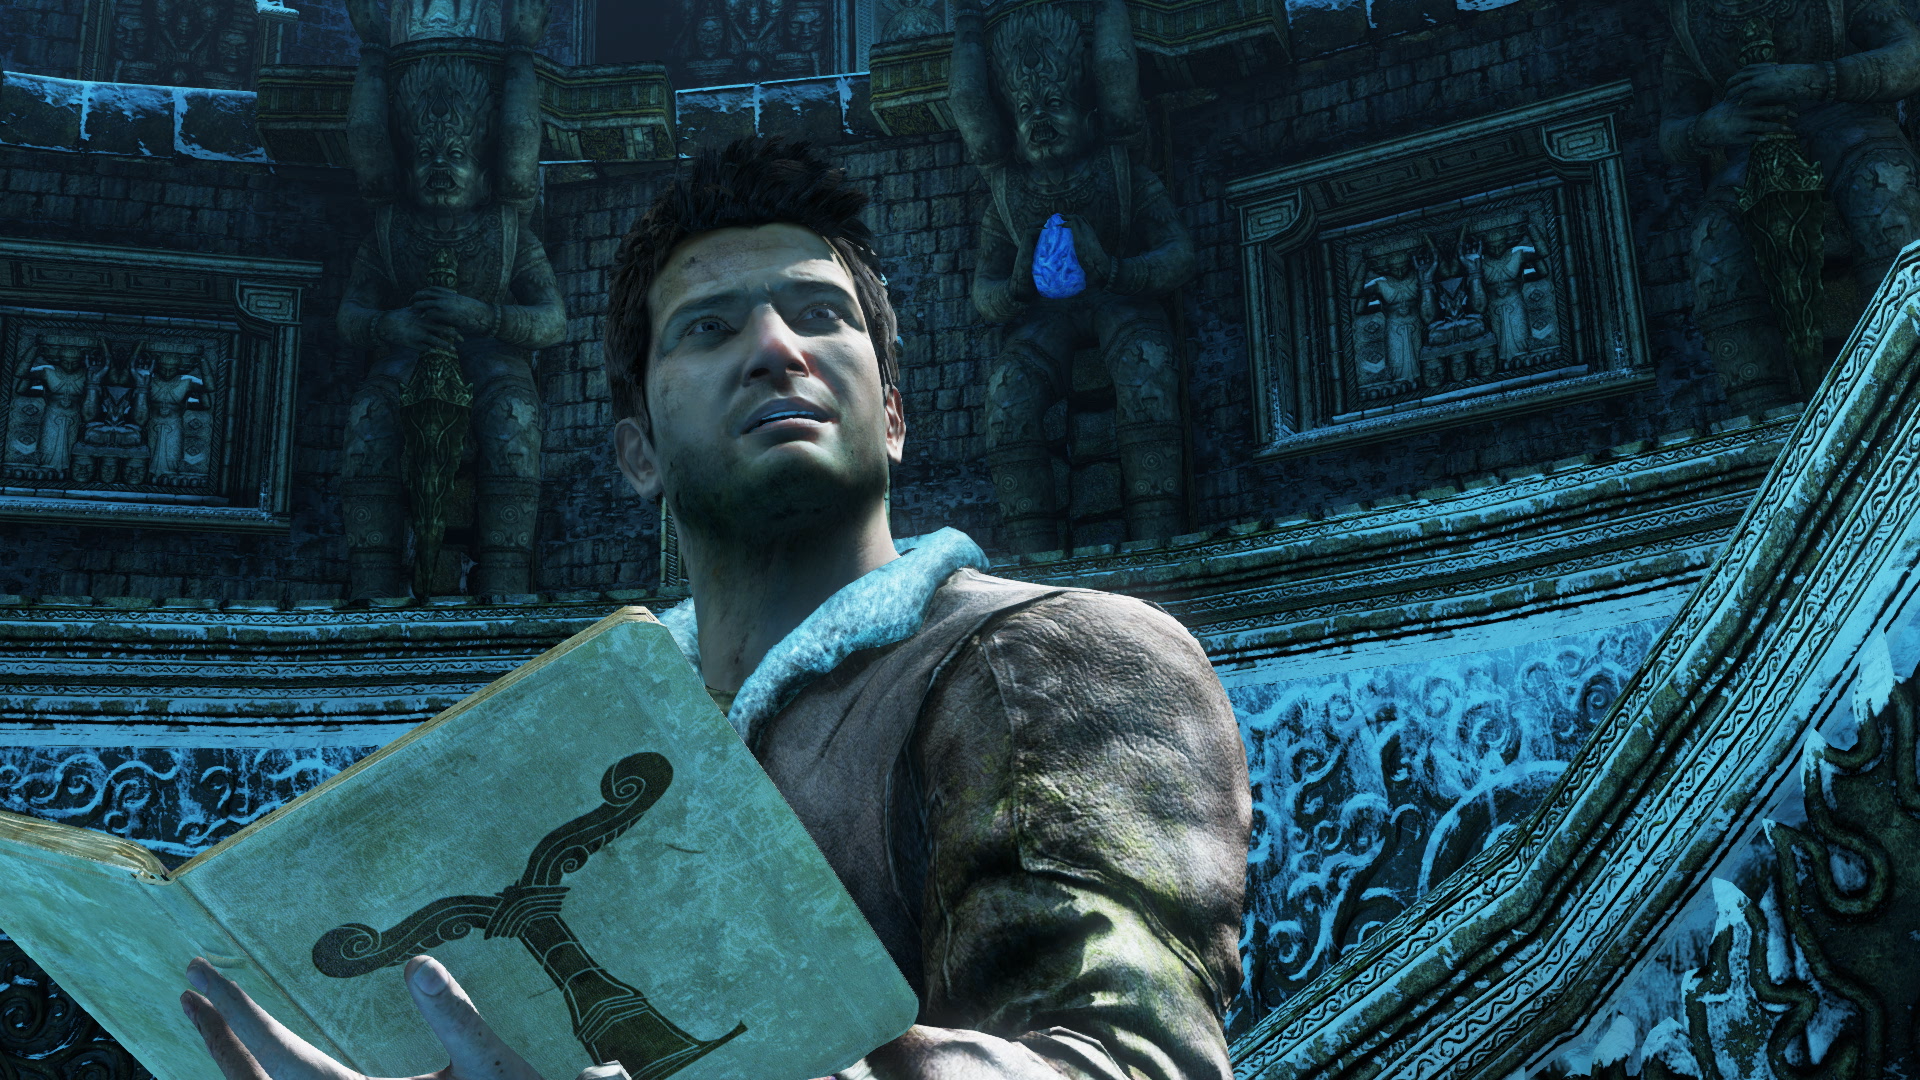 Uncharted: The Nathan Drake Collection Review (PlayStation 4)